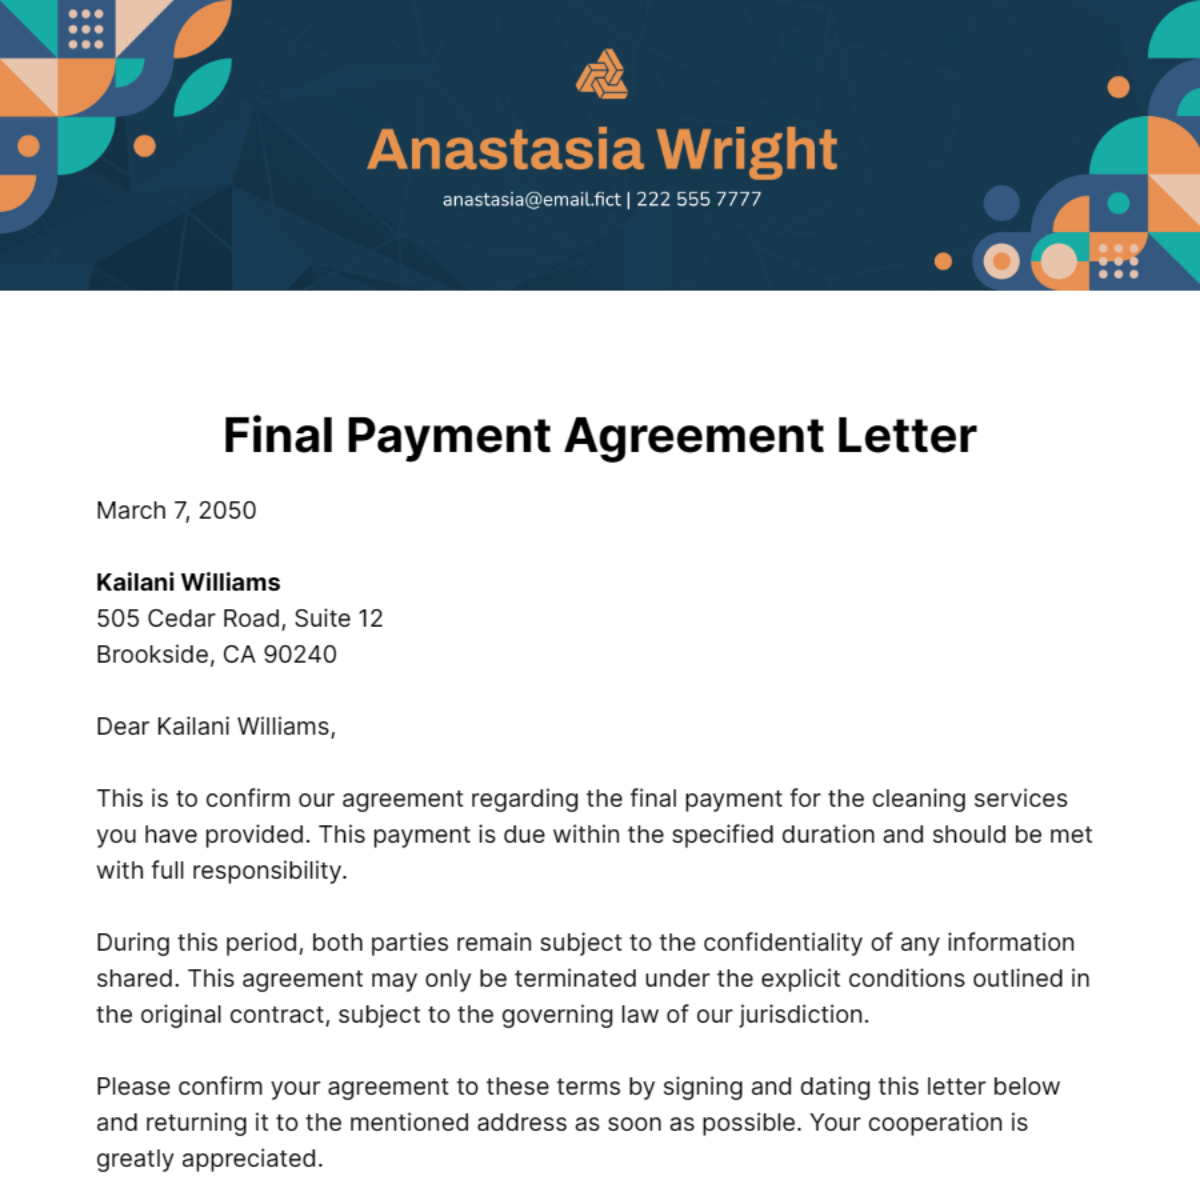 Final Payment Agreement Letter Template